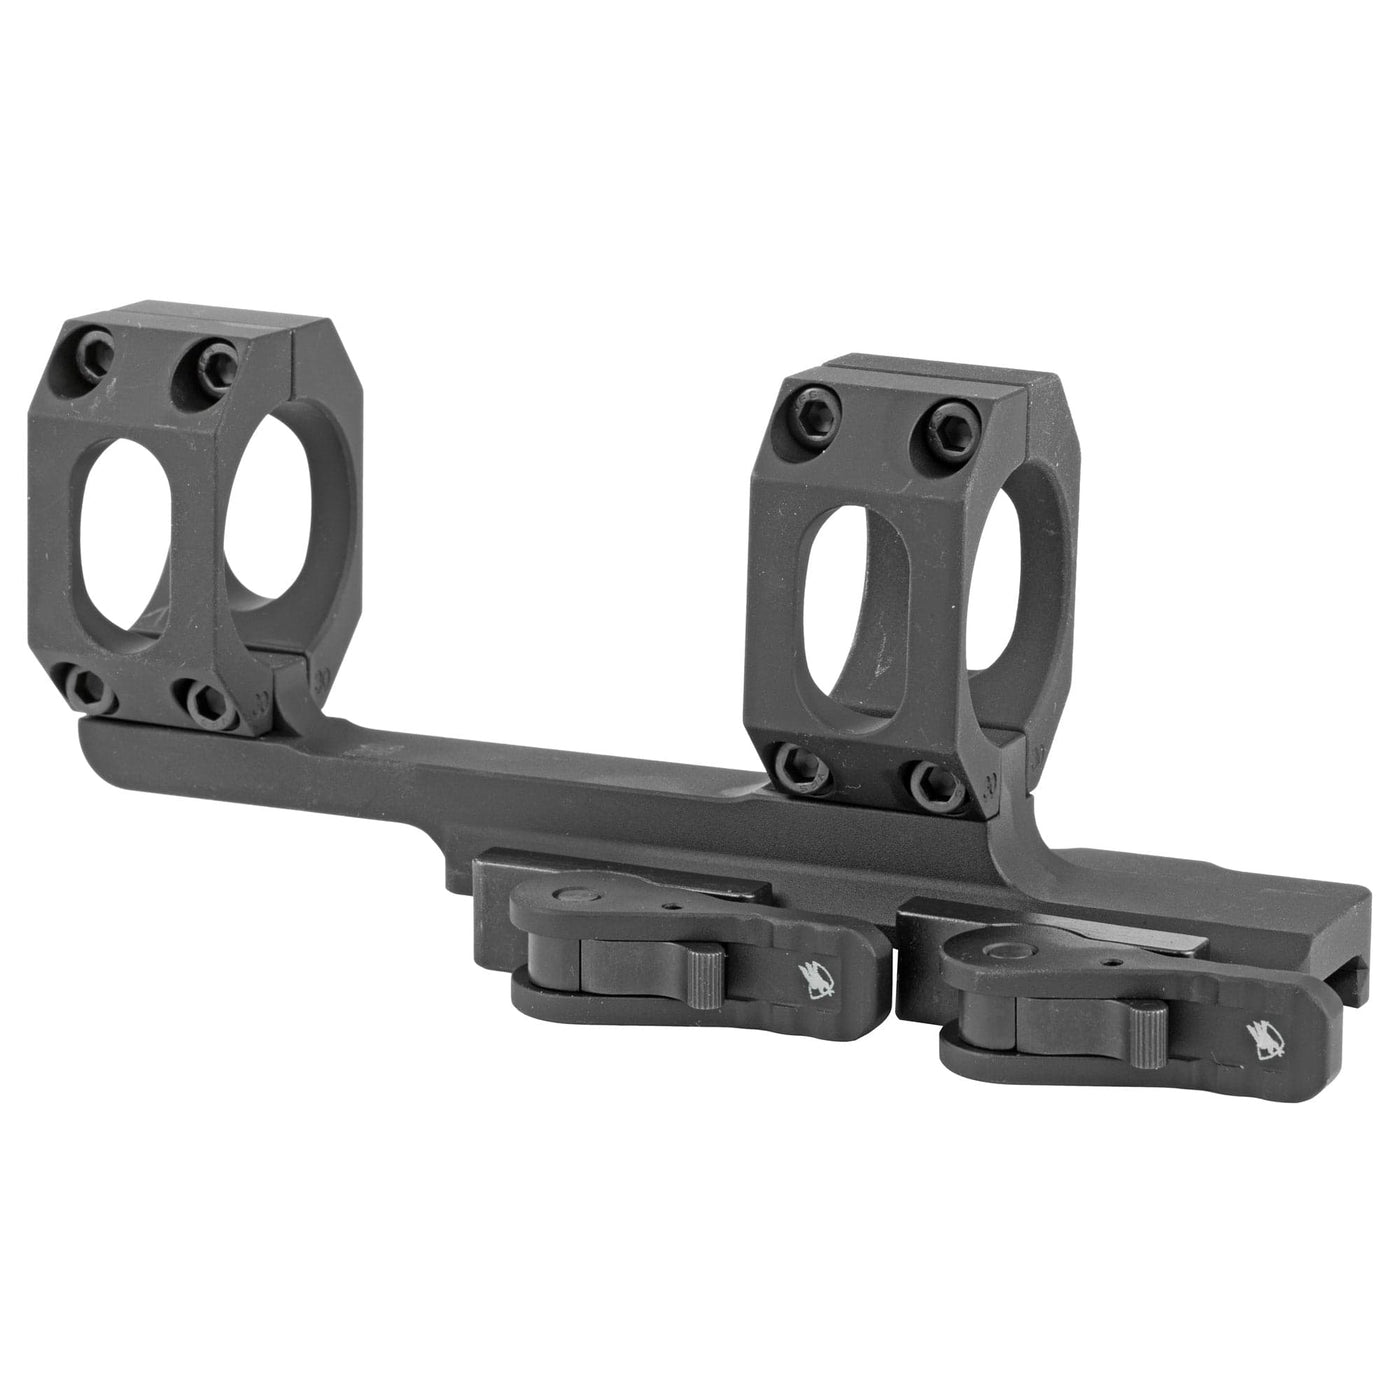 American Defense Mfg. Am Def Ad-recon Scp Mnt Tact 30mm Bk Scope Mounts